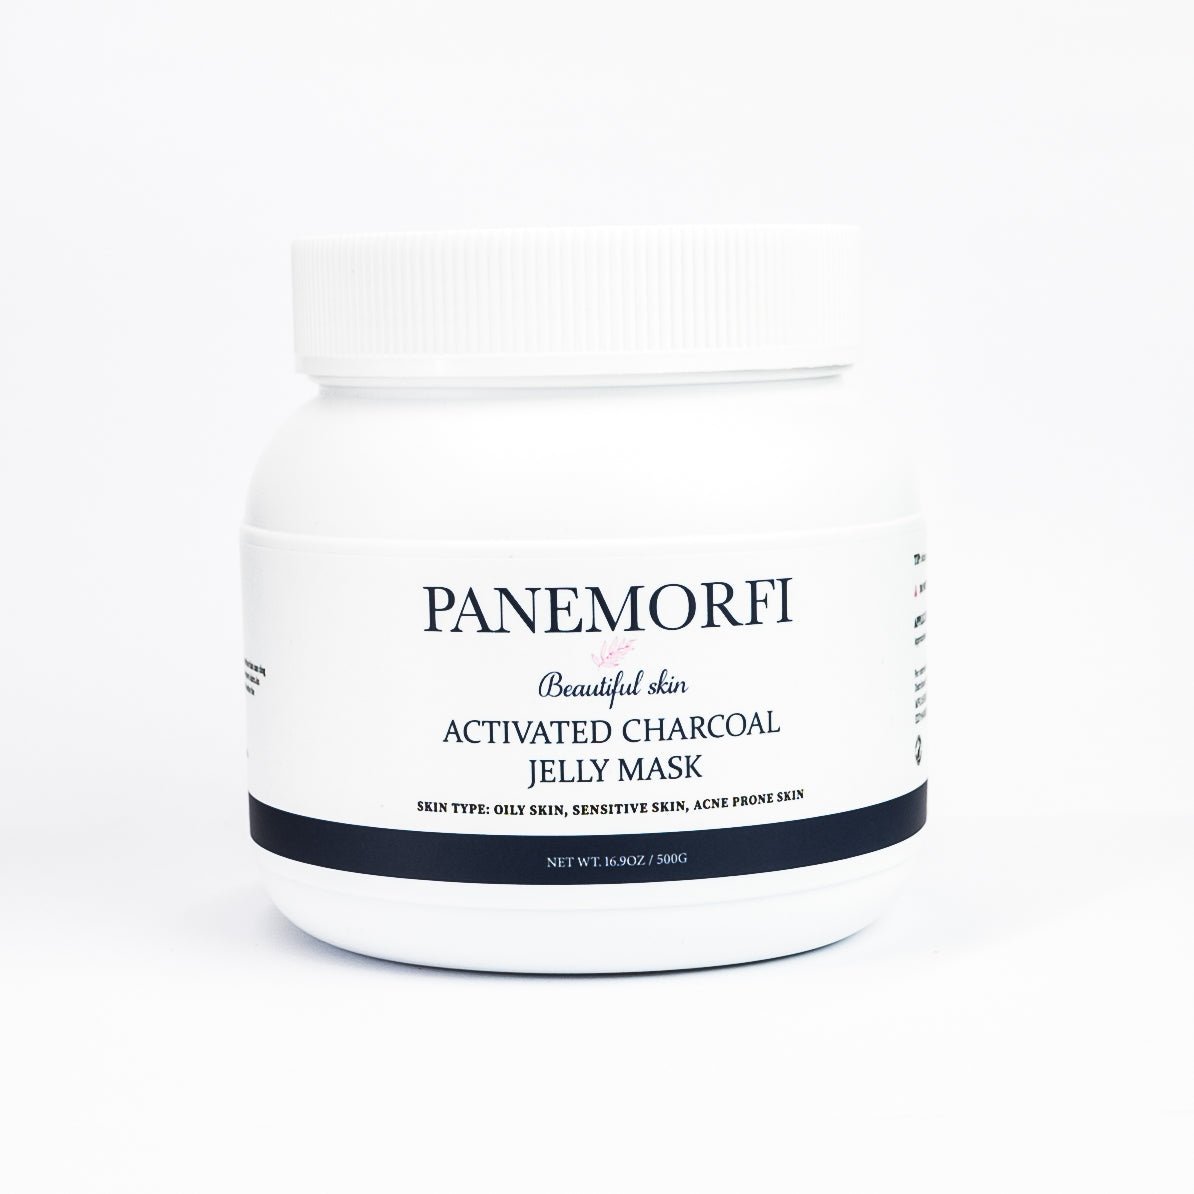 PANEMORFI - ACTIVATED CHARCOAL JELLY MASK - Luna Beauty Supplies